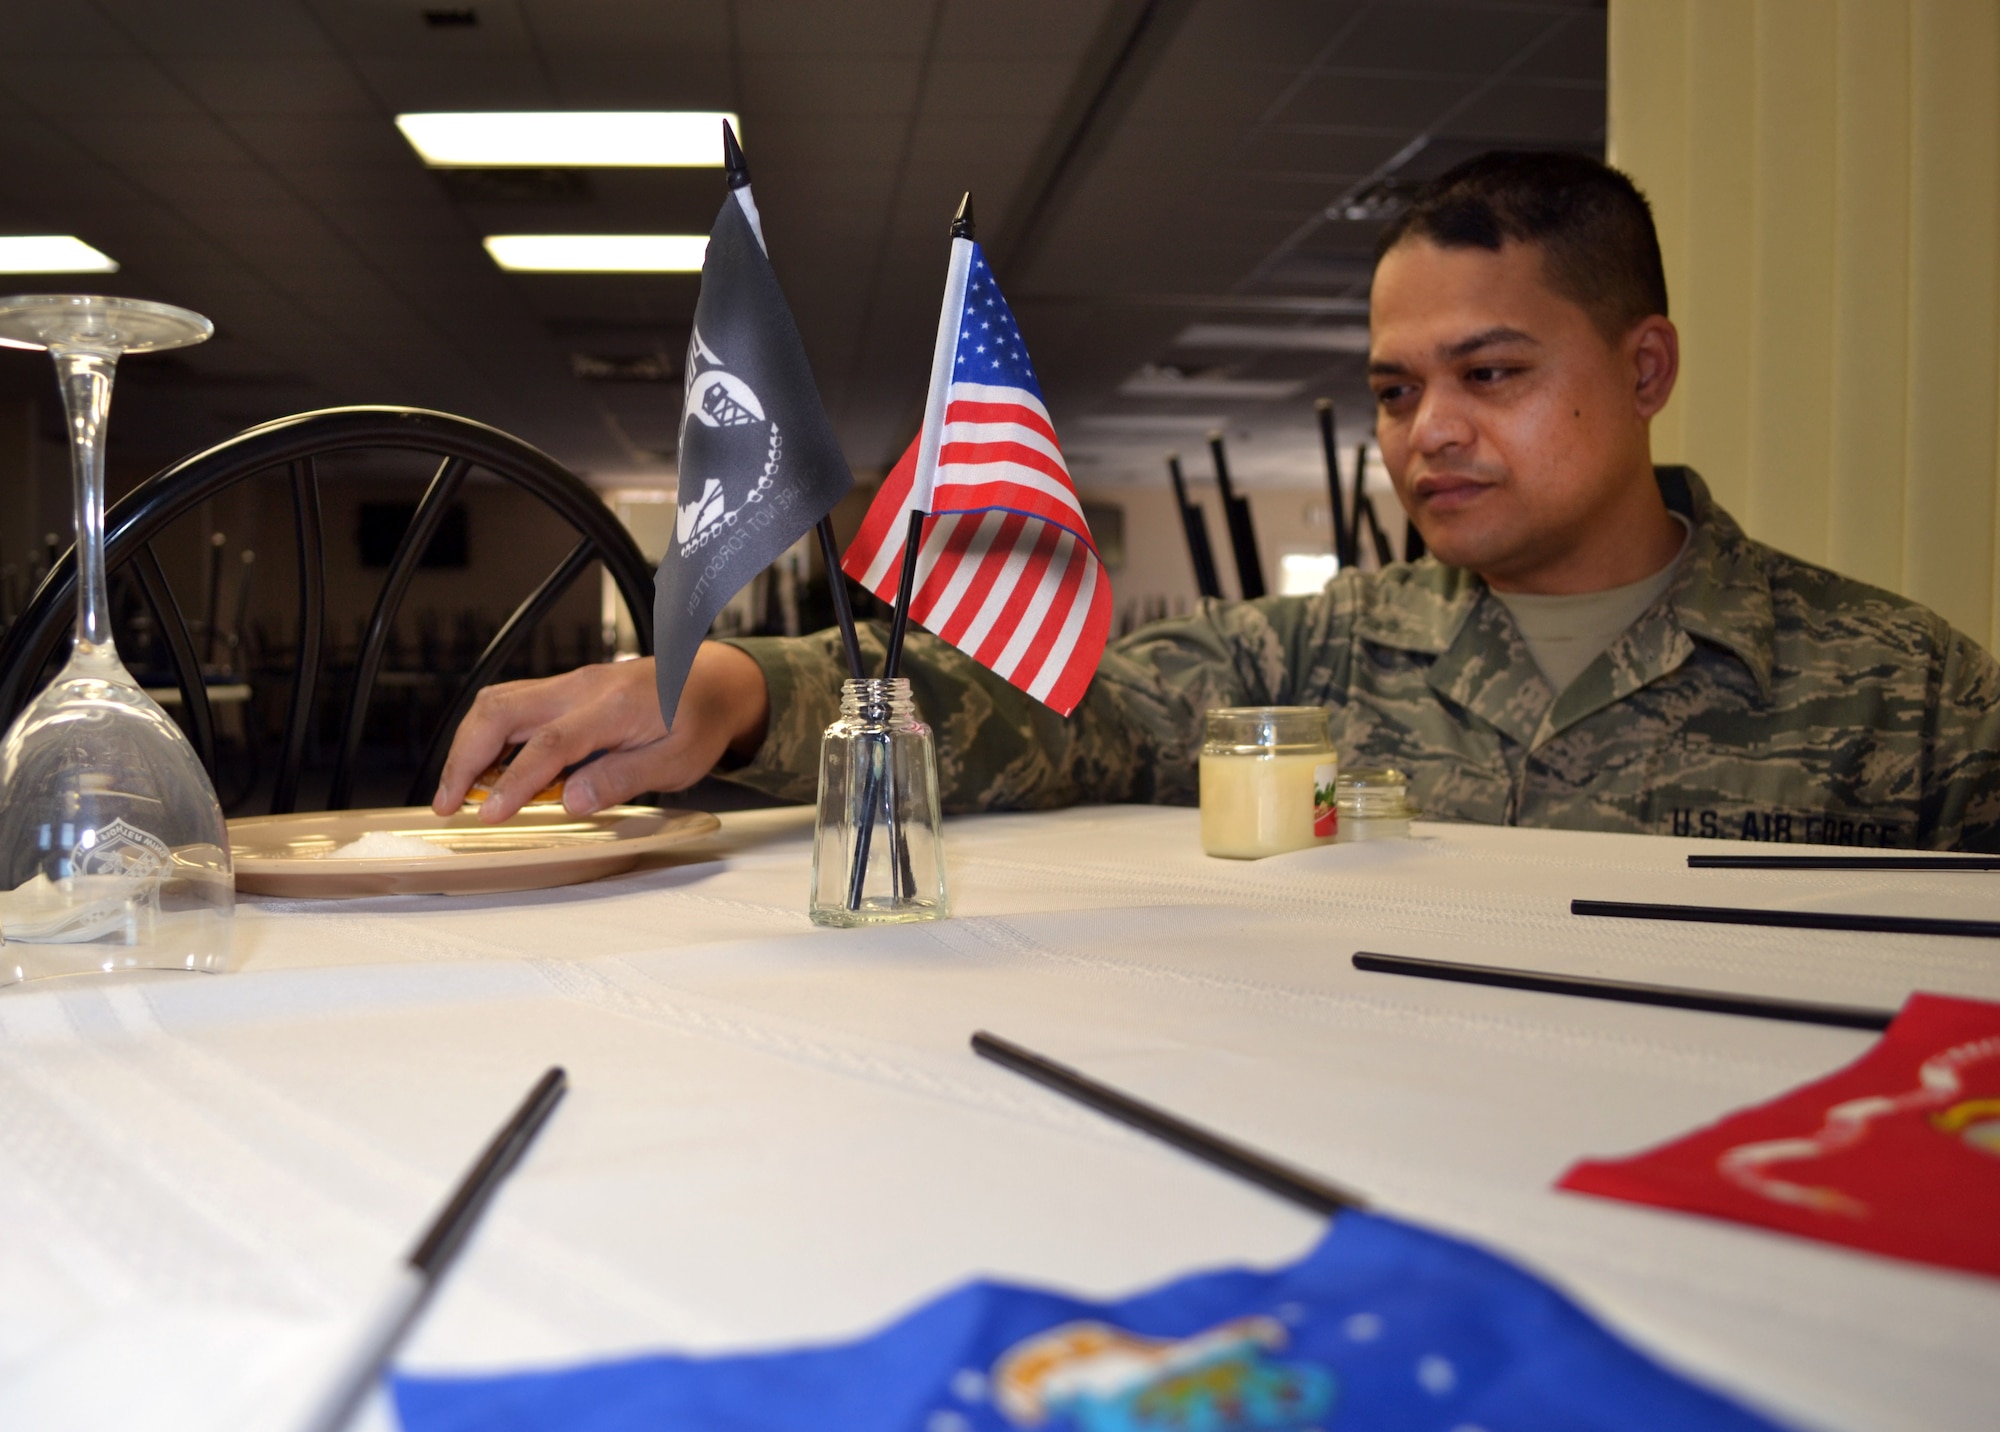 Senior Airman Alan Phe, of the 111th Force Support Squadron Service Flight, removes the lemon slice from the bread plate of the prisoners of war/missing in action (POW/MIA) table he created recently at Horsham Air Guard Station, Pennsylvania, Feb. 22, 2016. Commonly located in the dining areas of military installations, at ceremonies and at events, prior to Phe's assembly of the display, Horsham AGS did not have one on the installation. (U.S. Air Force photo by Tech. Sgt. Andria Allmond)